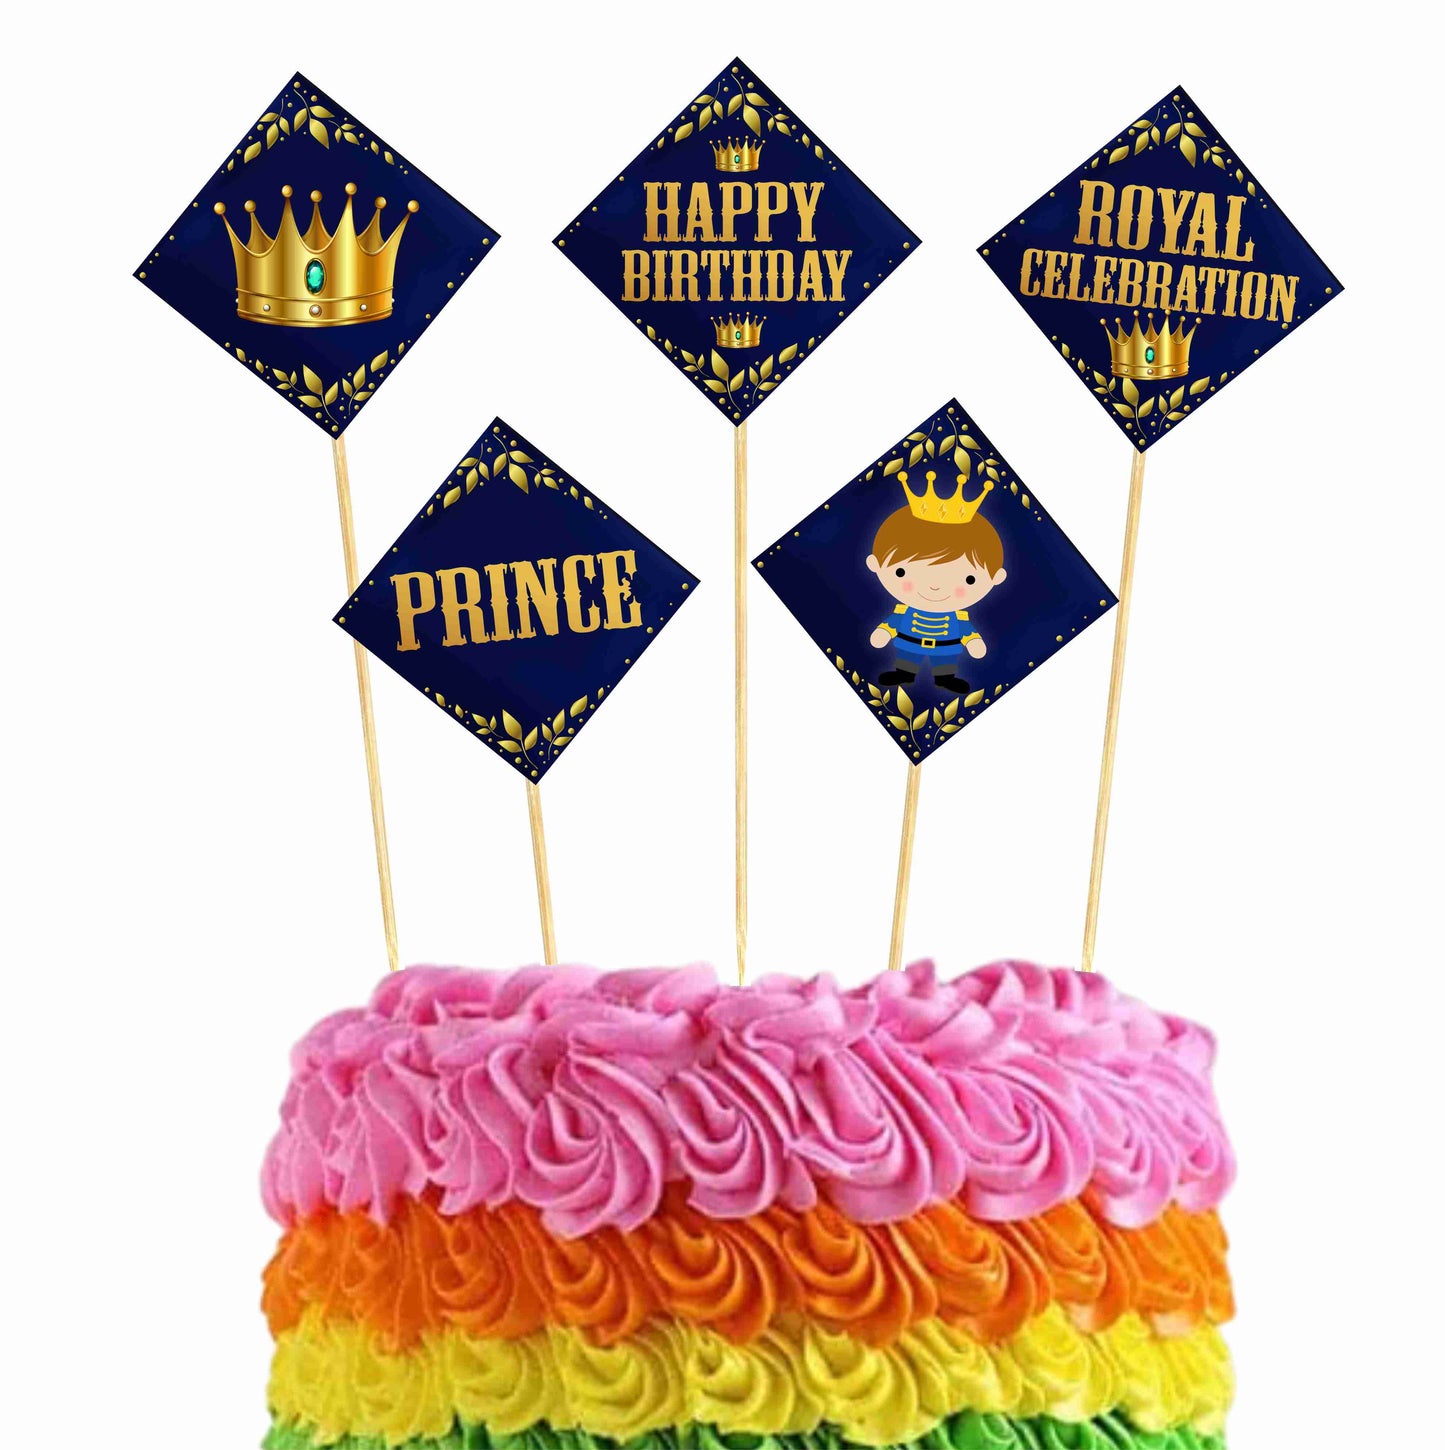 Prince Theme Cake Topper Pack of 10 Nos for Birthday Cake Decoration Theme Party Item For Boys Girls Adults Birthday Theme Decor